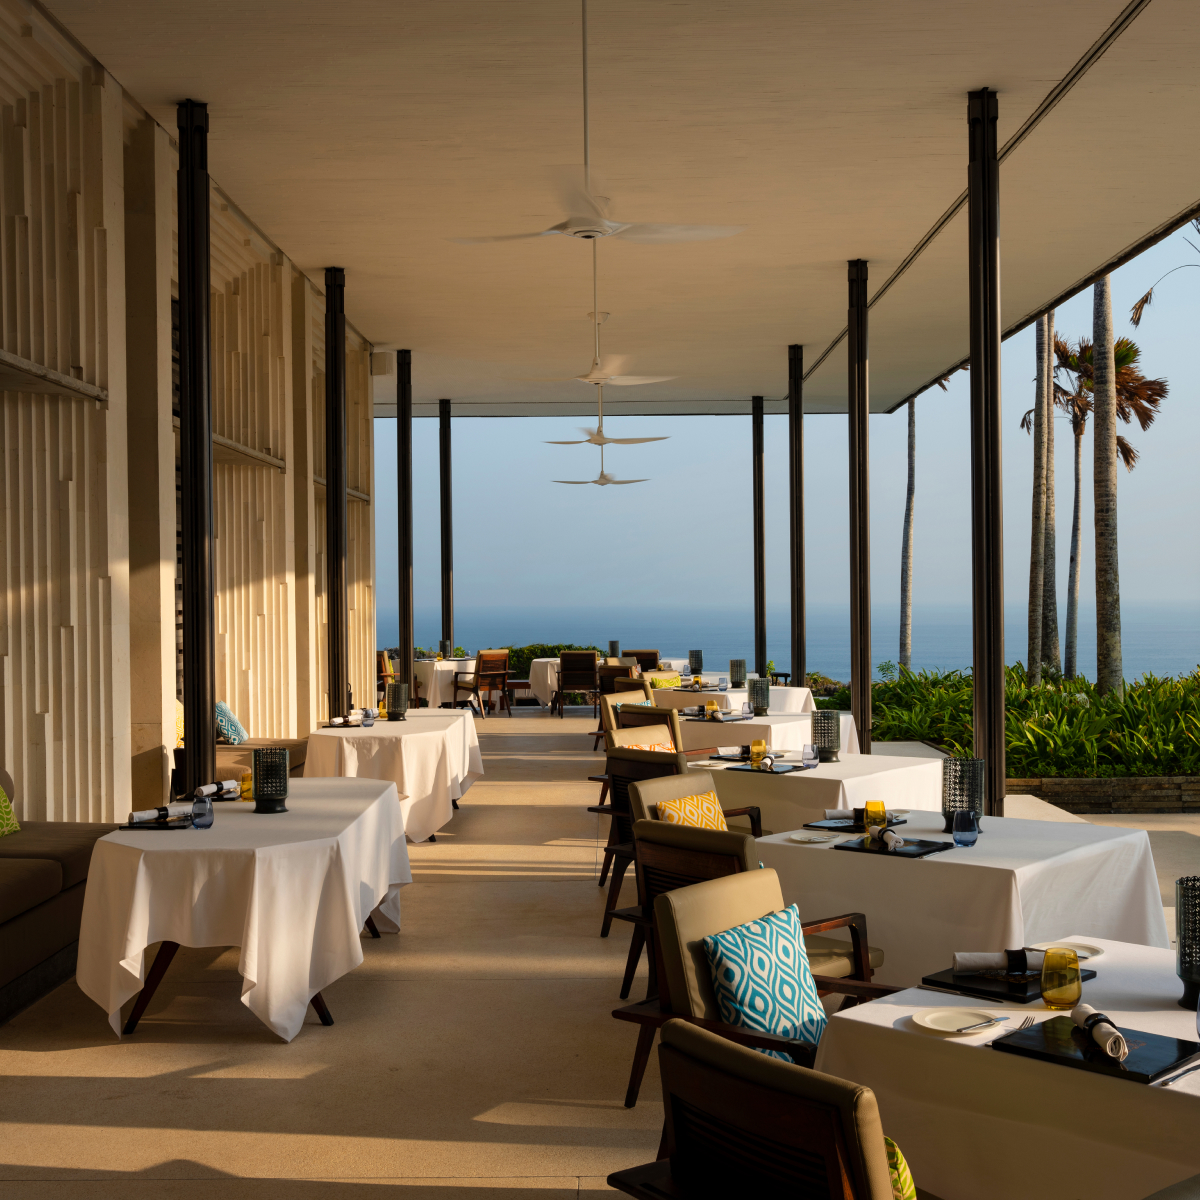 Tables and chairs in an outdoor setting under a covered patio with the ocean in the background